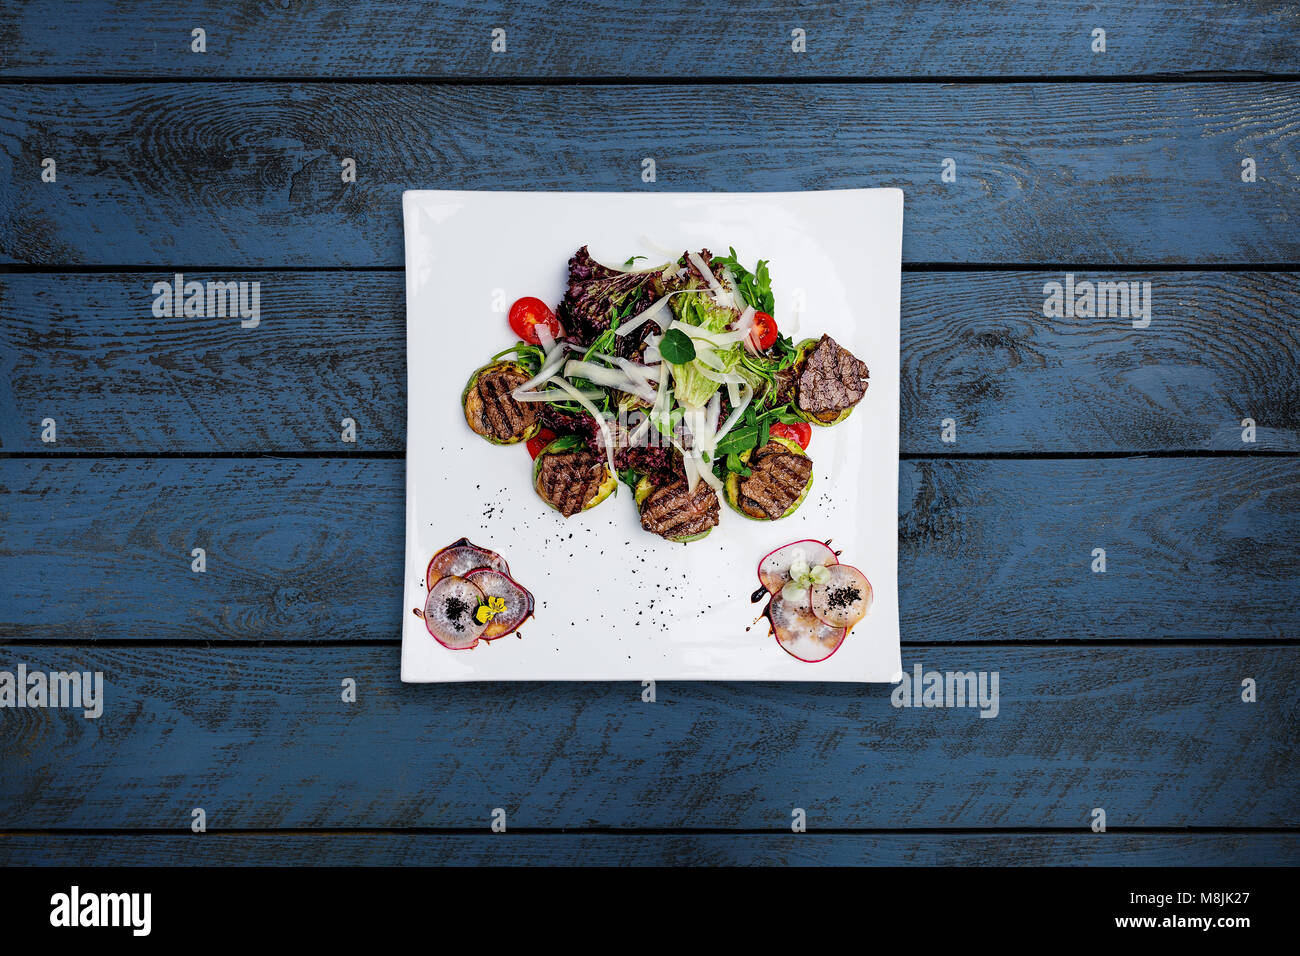 Warm salad with grilled veal, mix vegetables and apple sauce. Stock Photo